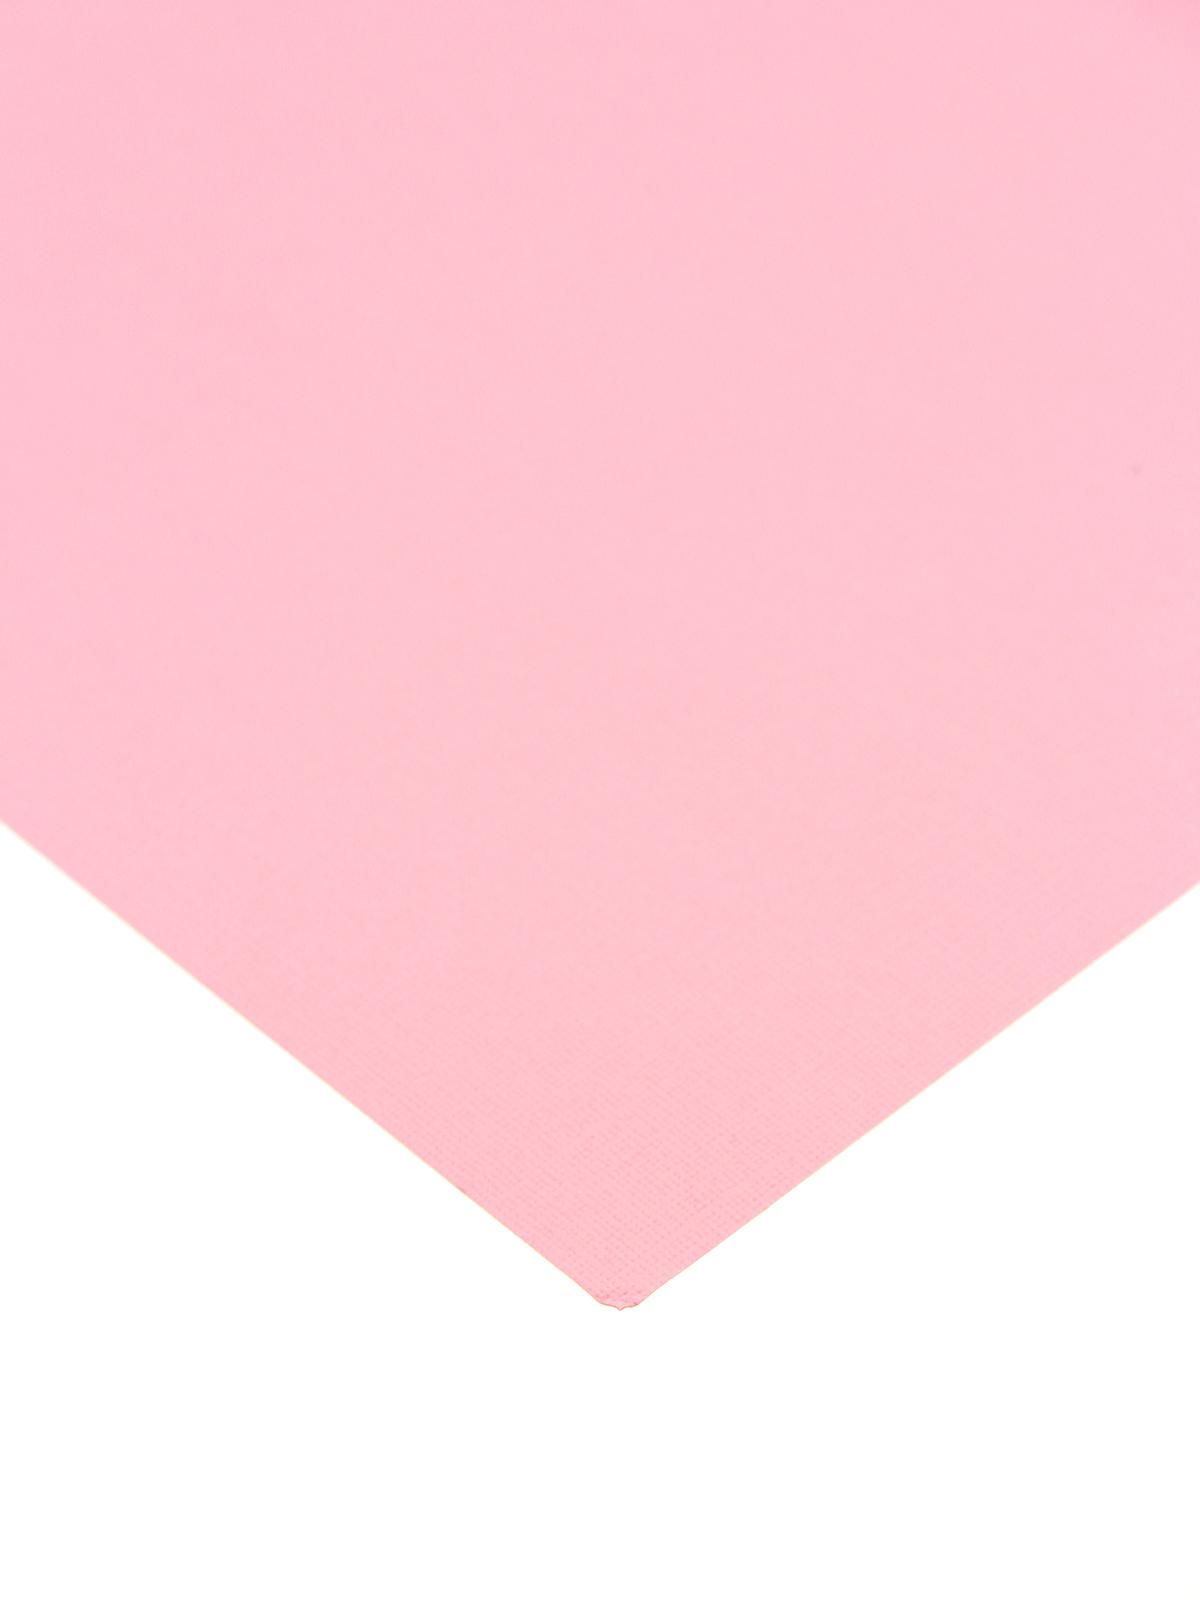 80 Lb. Canvas 12 In. X 12 In. Sheet Coral Rose